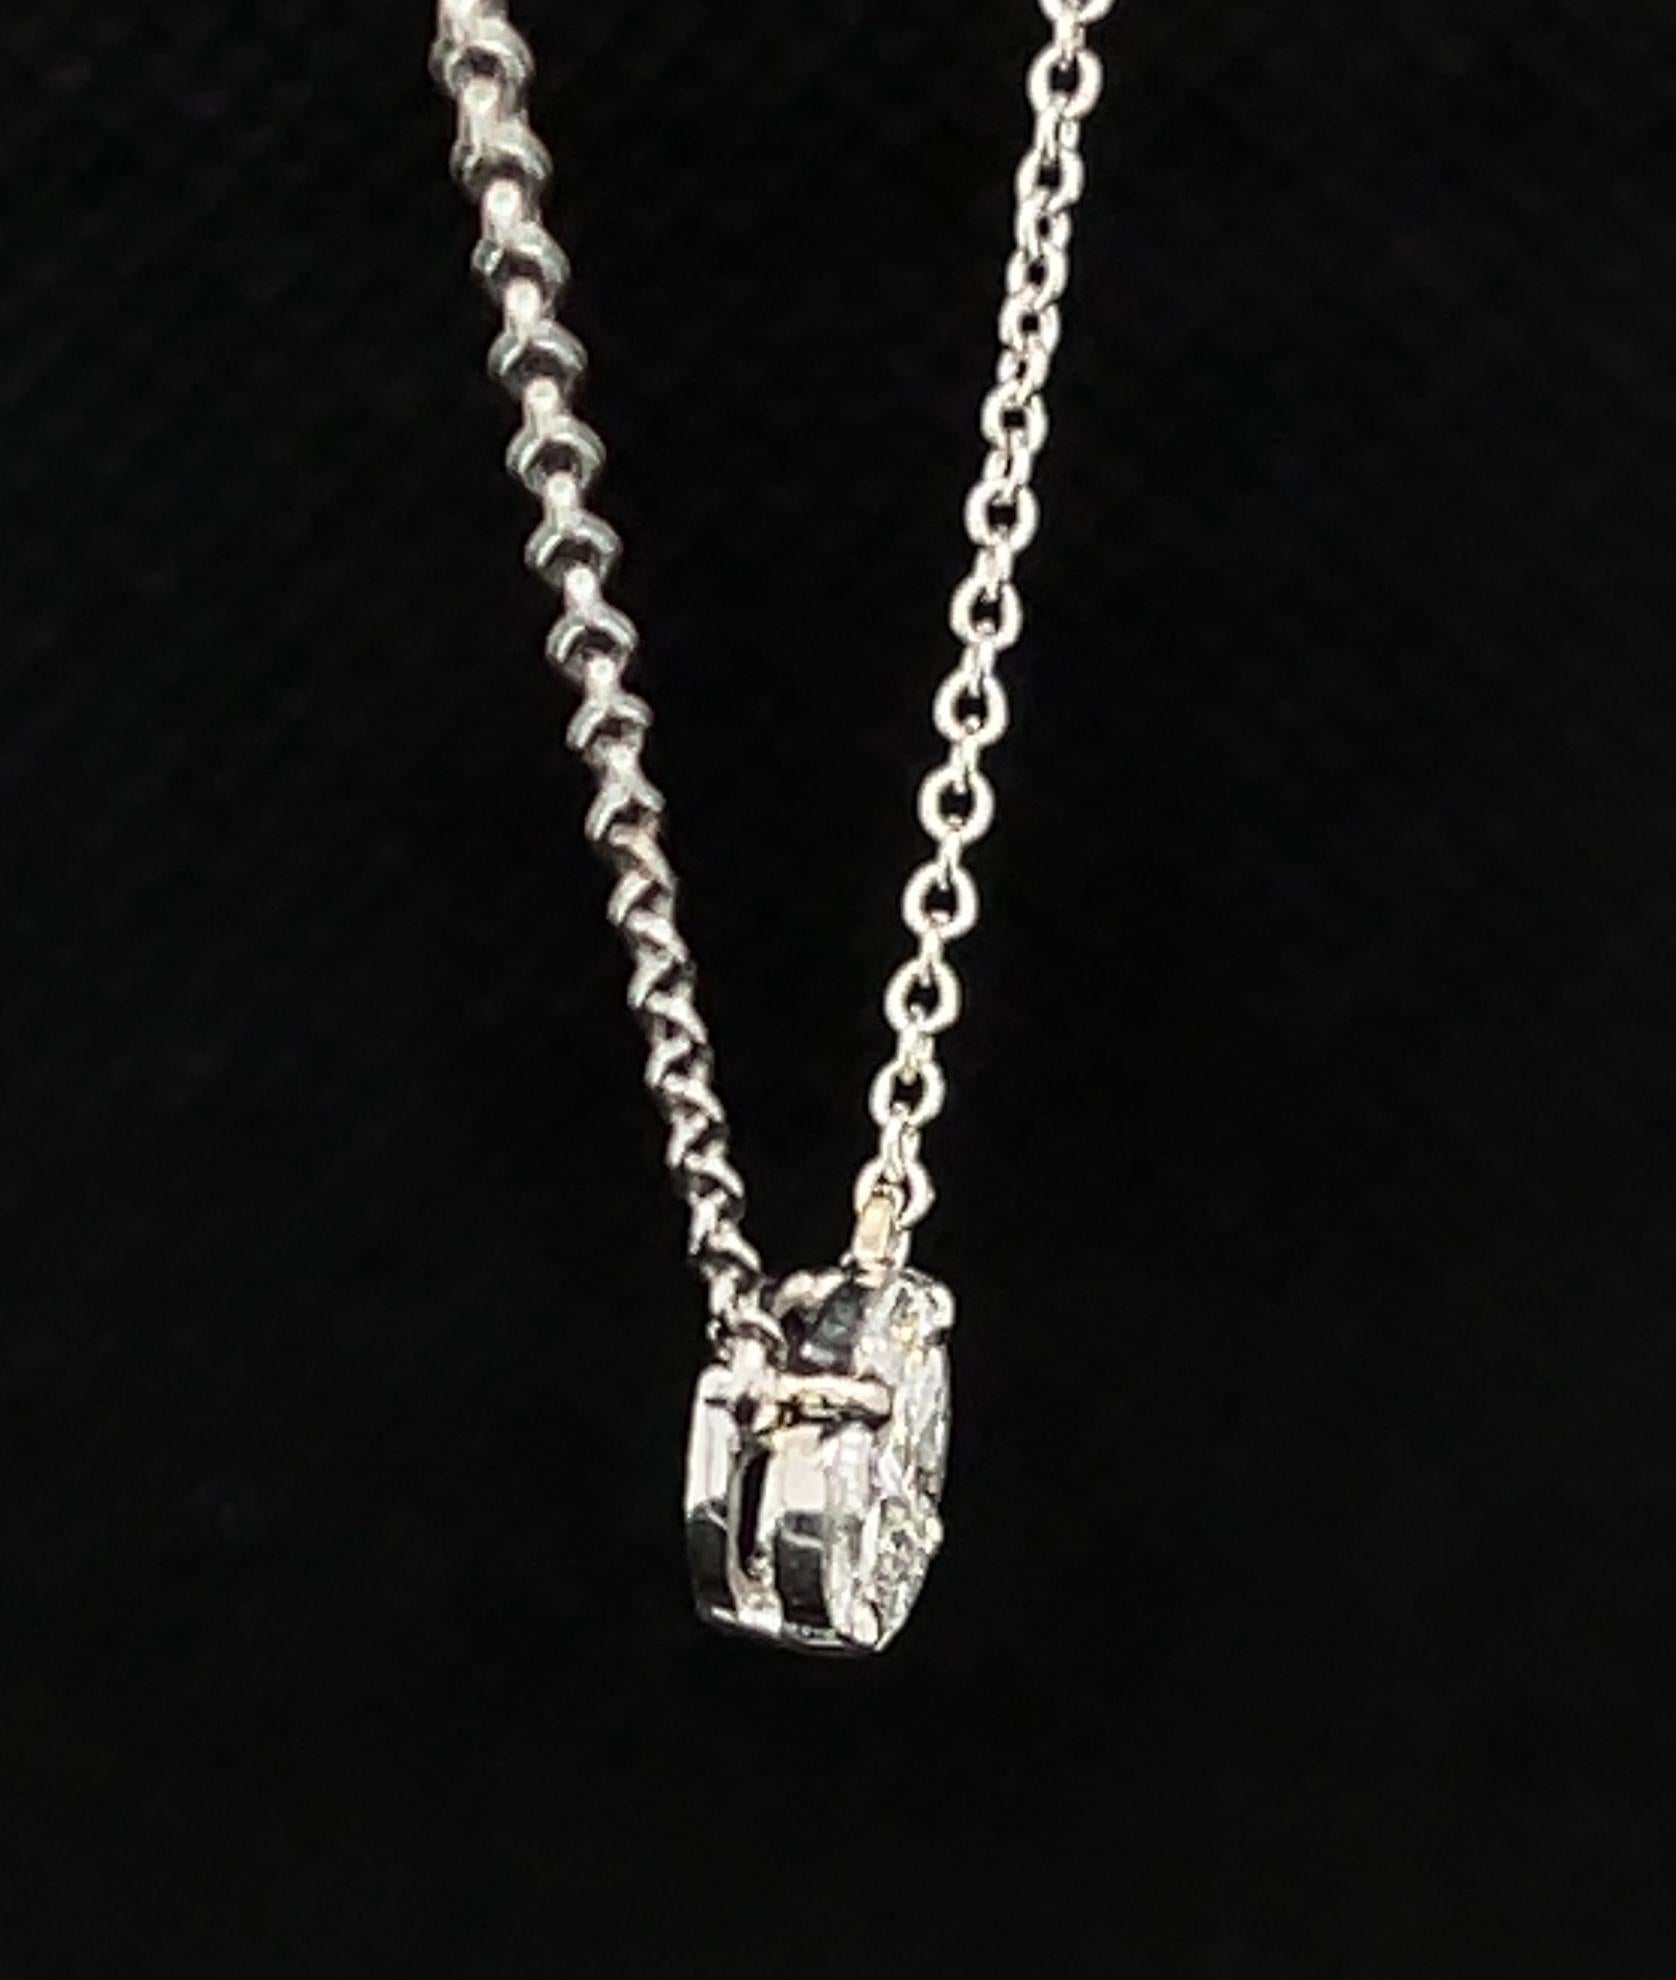 Artisan Diamond and White Gold Illusion Pendant Necklace, .26 Carats Total